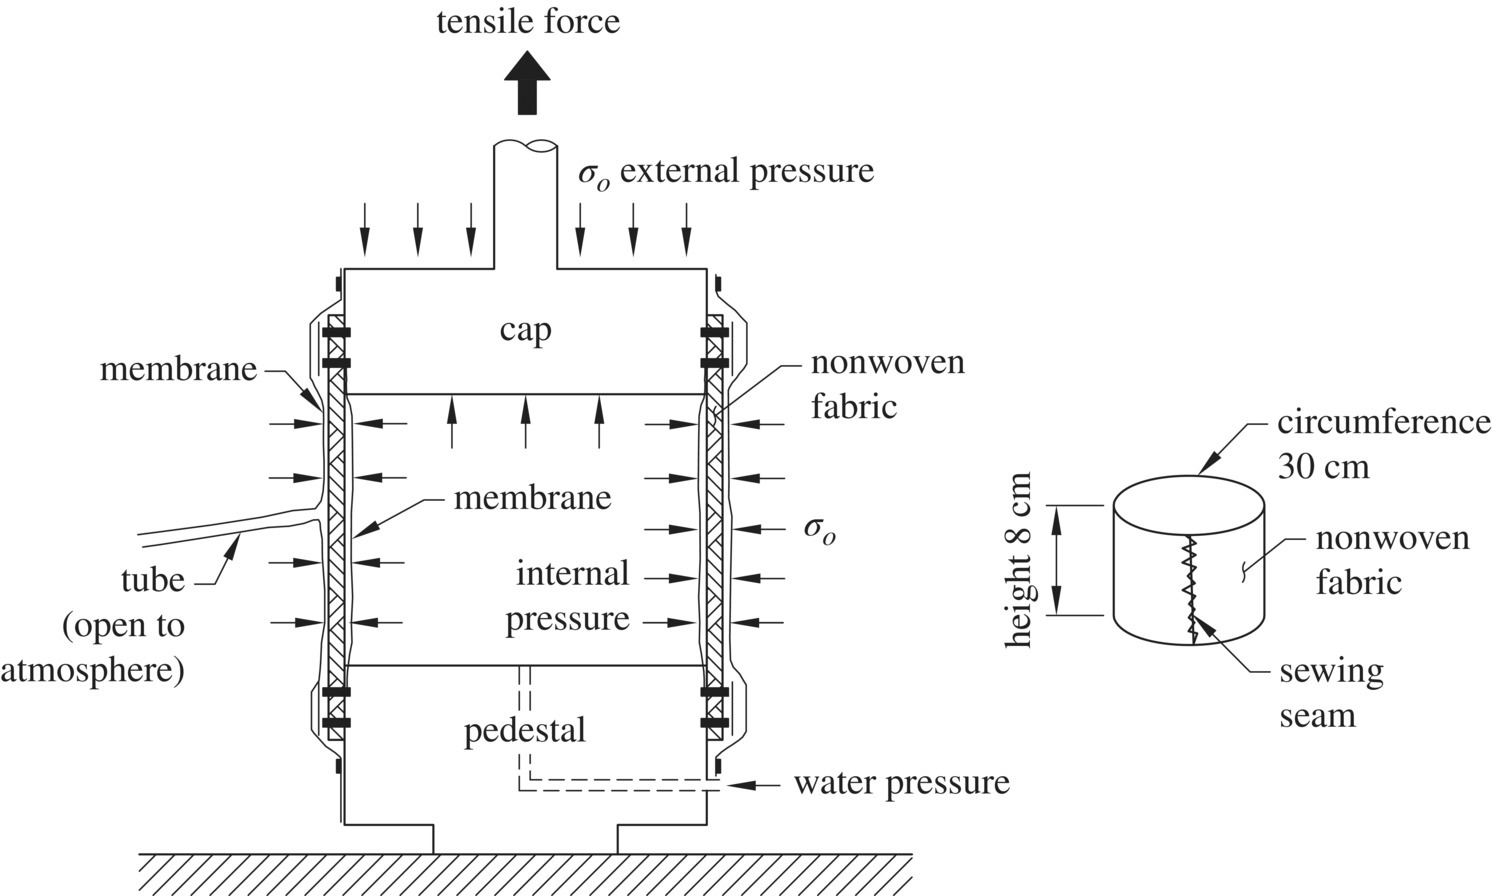 Schematic of the setup of a geosynthetic specimen of an infinite aspect ratio in the uniaxial load– deformation testing of geotextiles (left) and a cylindrical shape labeled nonwoven fabric (right).